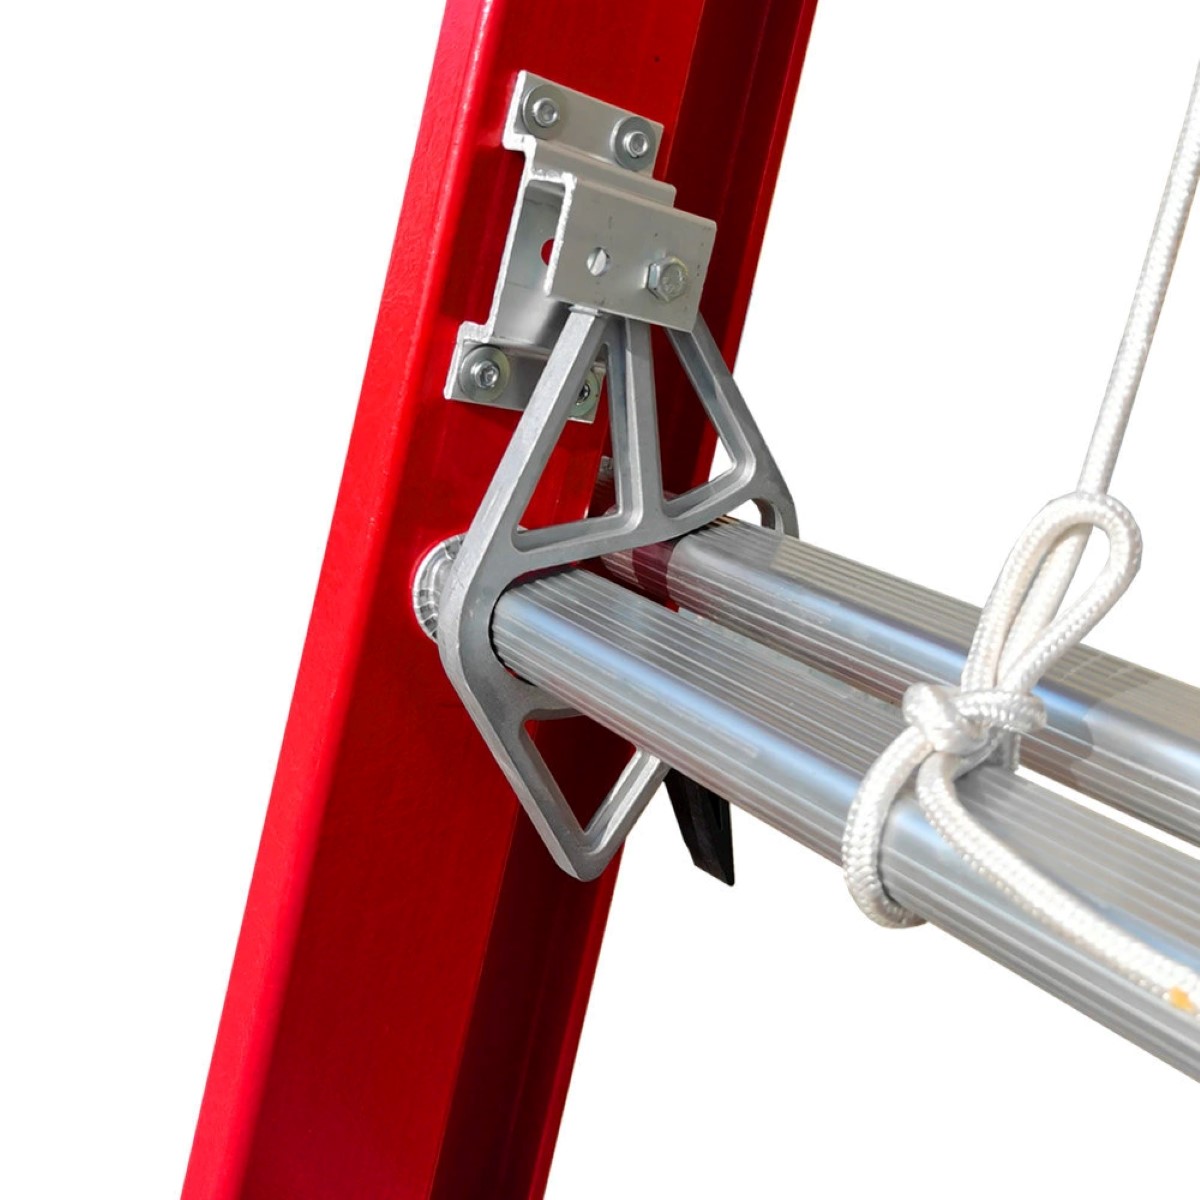 How To Lock Extension Ladder